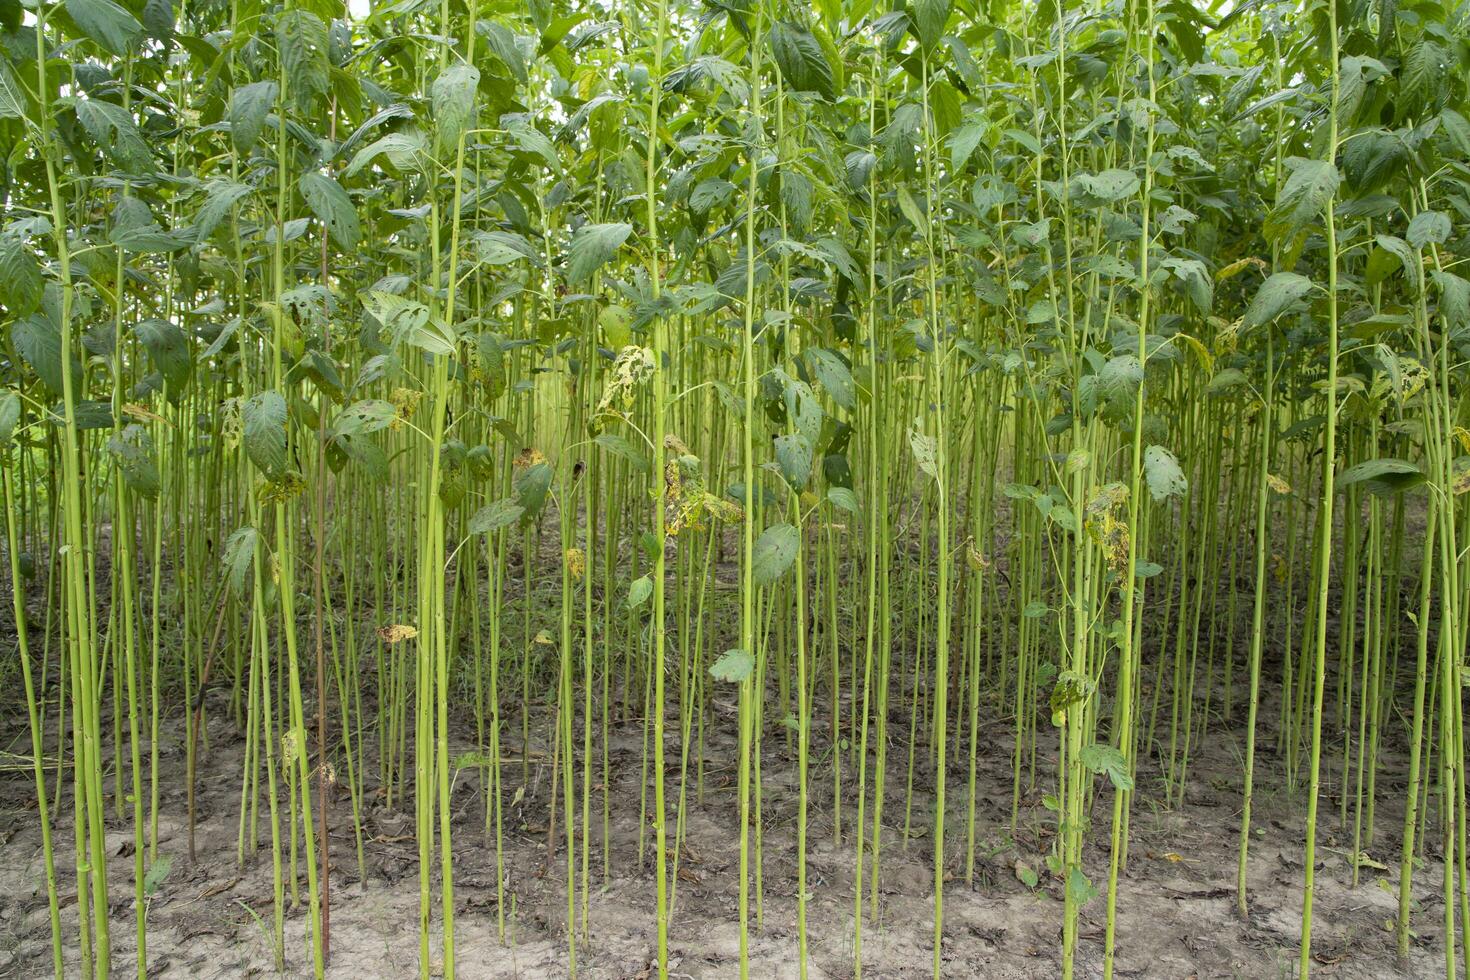 Green jute Plantation field.  Raw Jute plant pattern Texture background. This is the Called Golden Fiber in Bangladesh photo